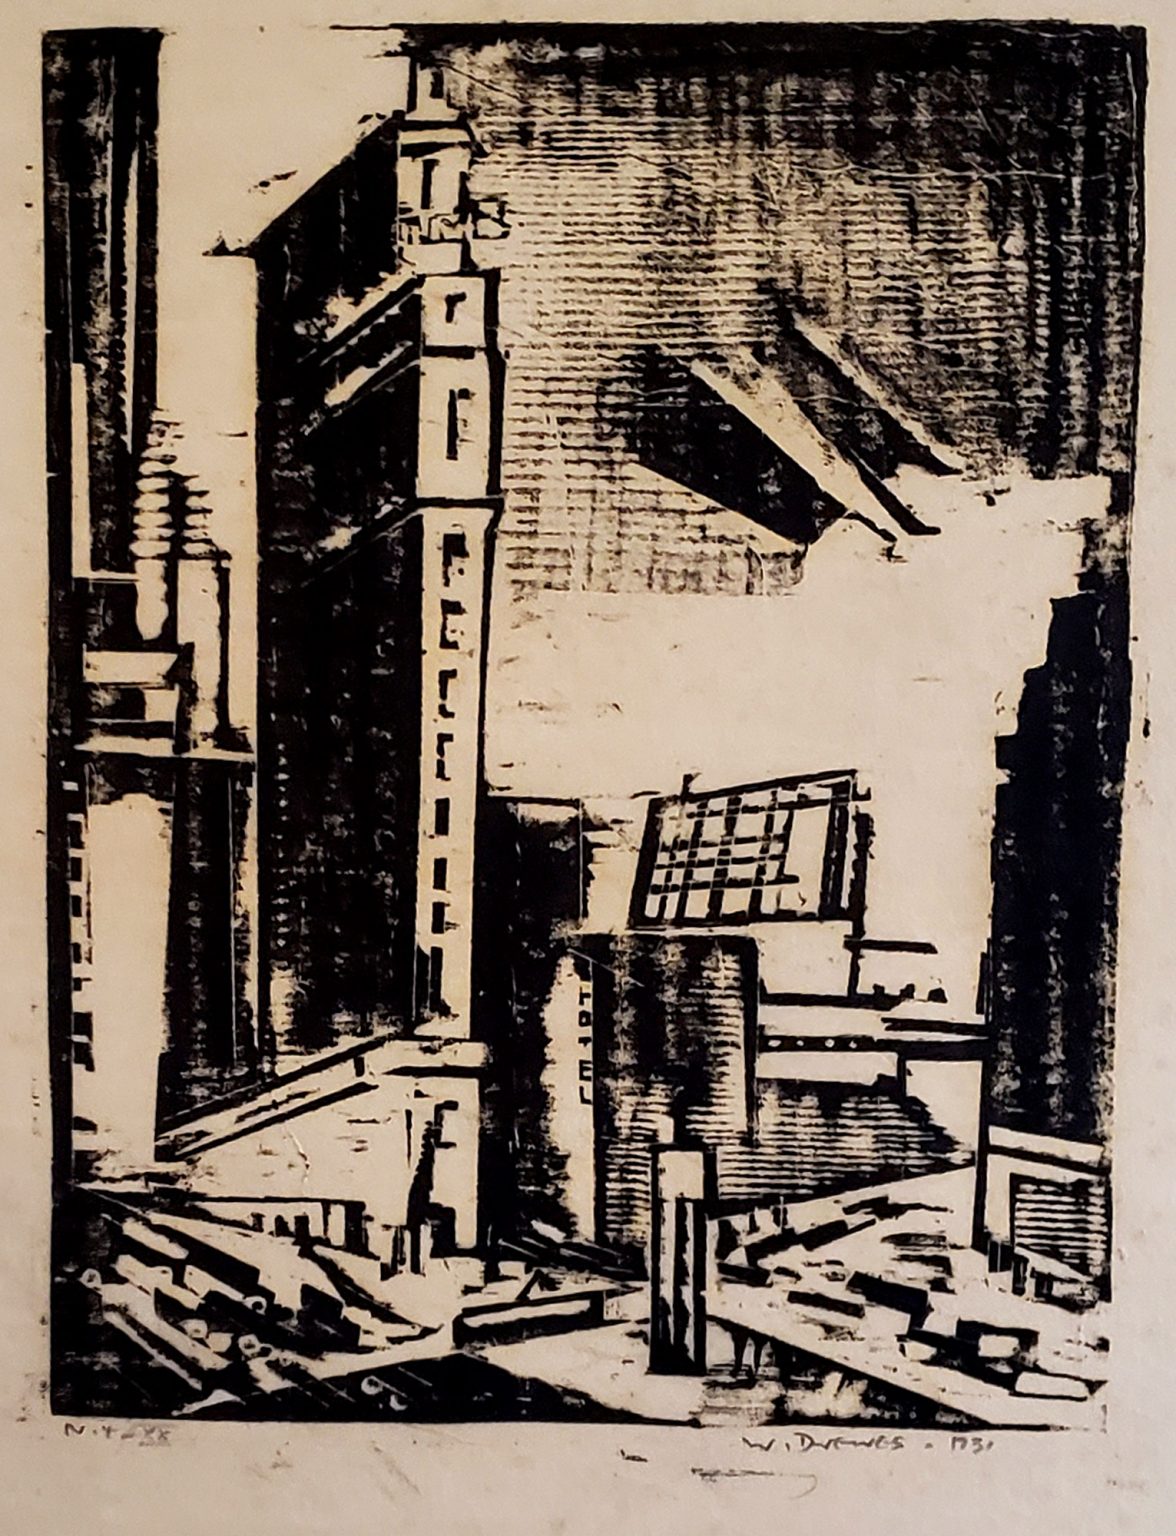 WERNER DREWES Times Square